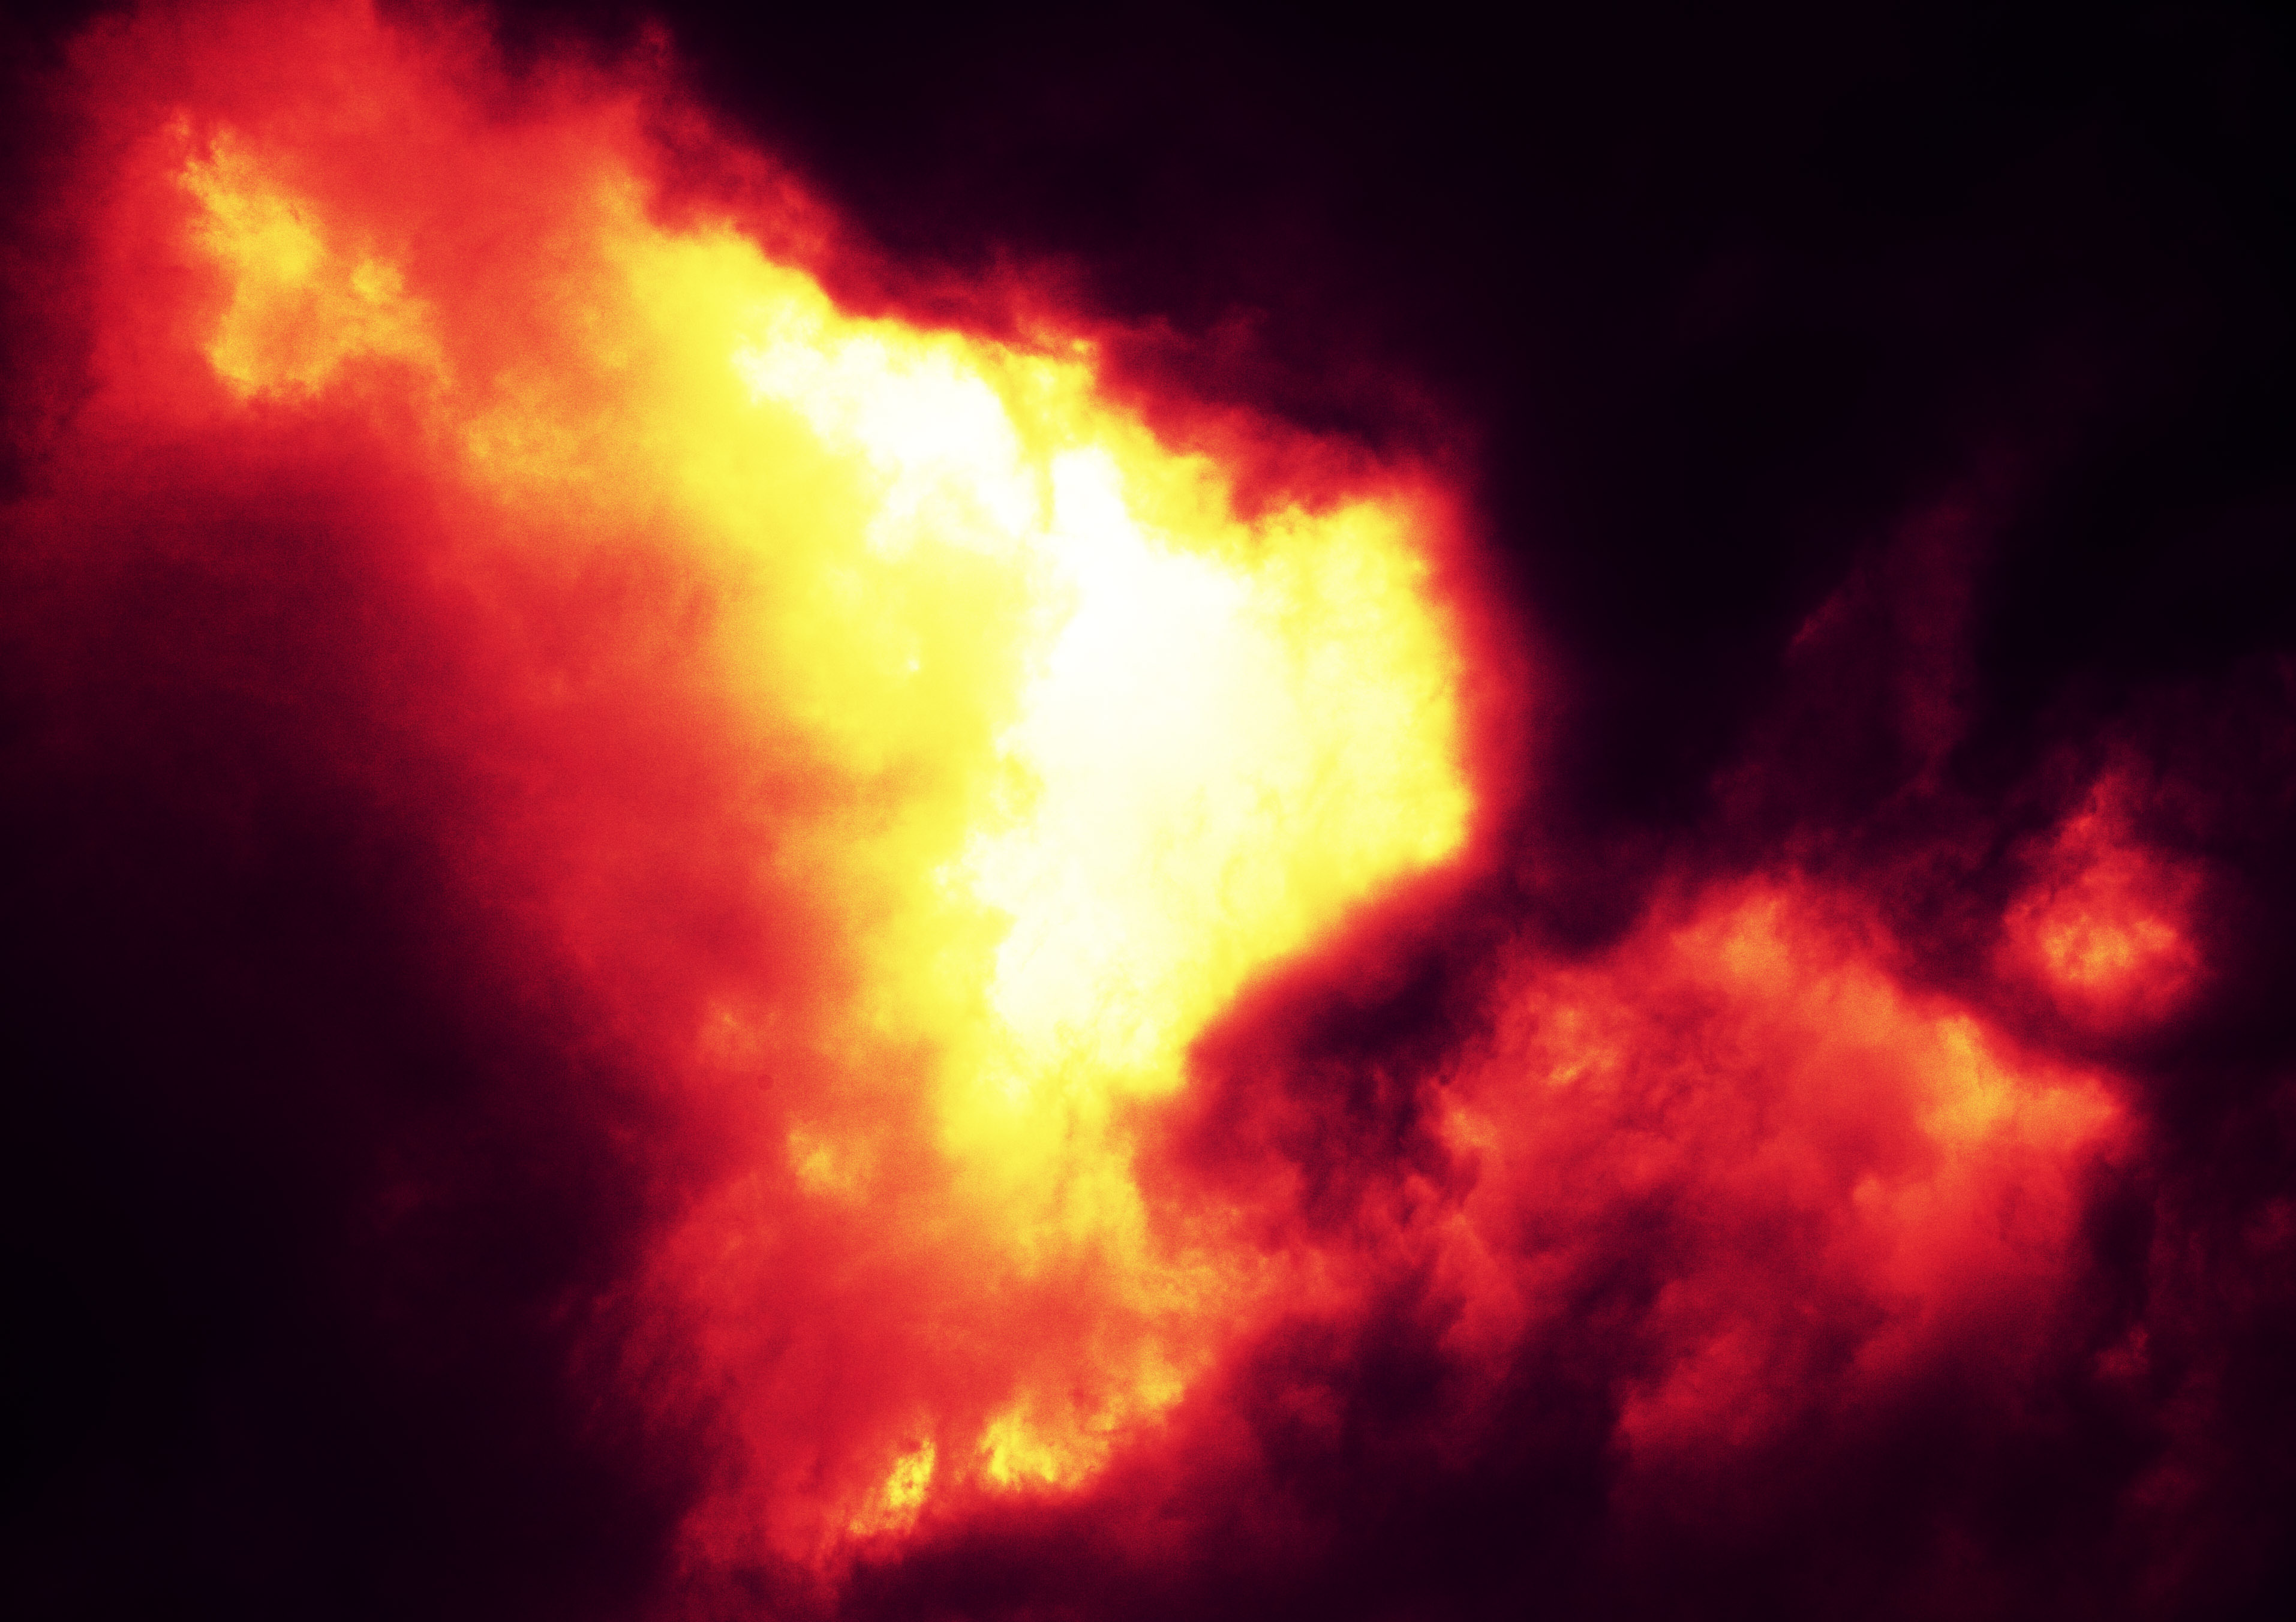 photo,material,free,landscape,picture,stock photo,Creative Commons,The cloud which does explosion destruction by fire, Destruction by fire, cloud, Brightness, Red